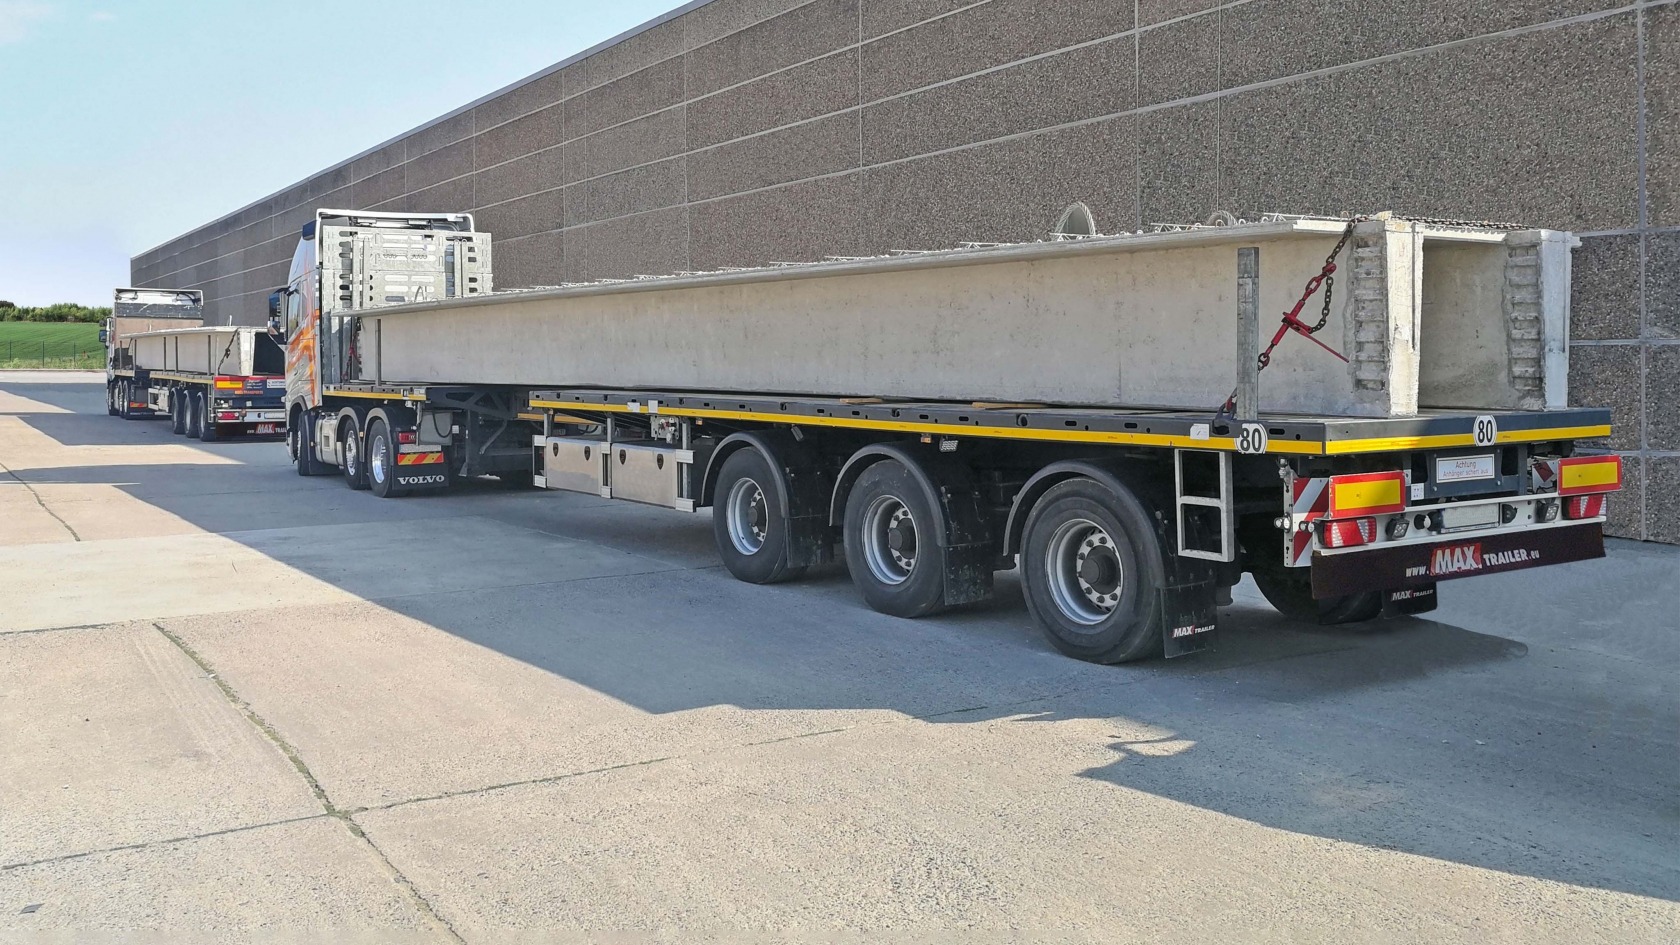 Transport of concrete beams in the finished parts sector